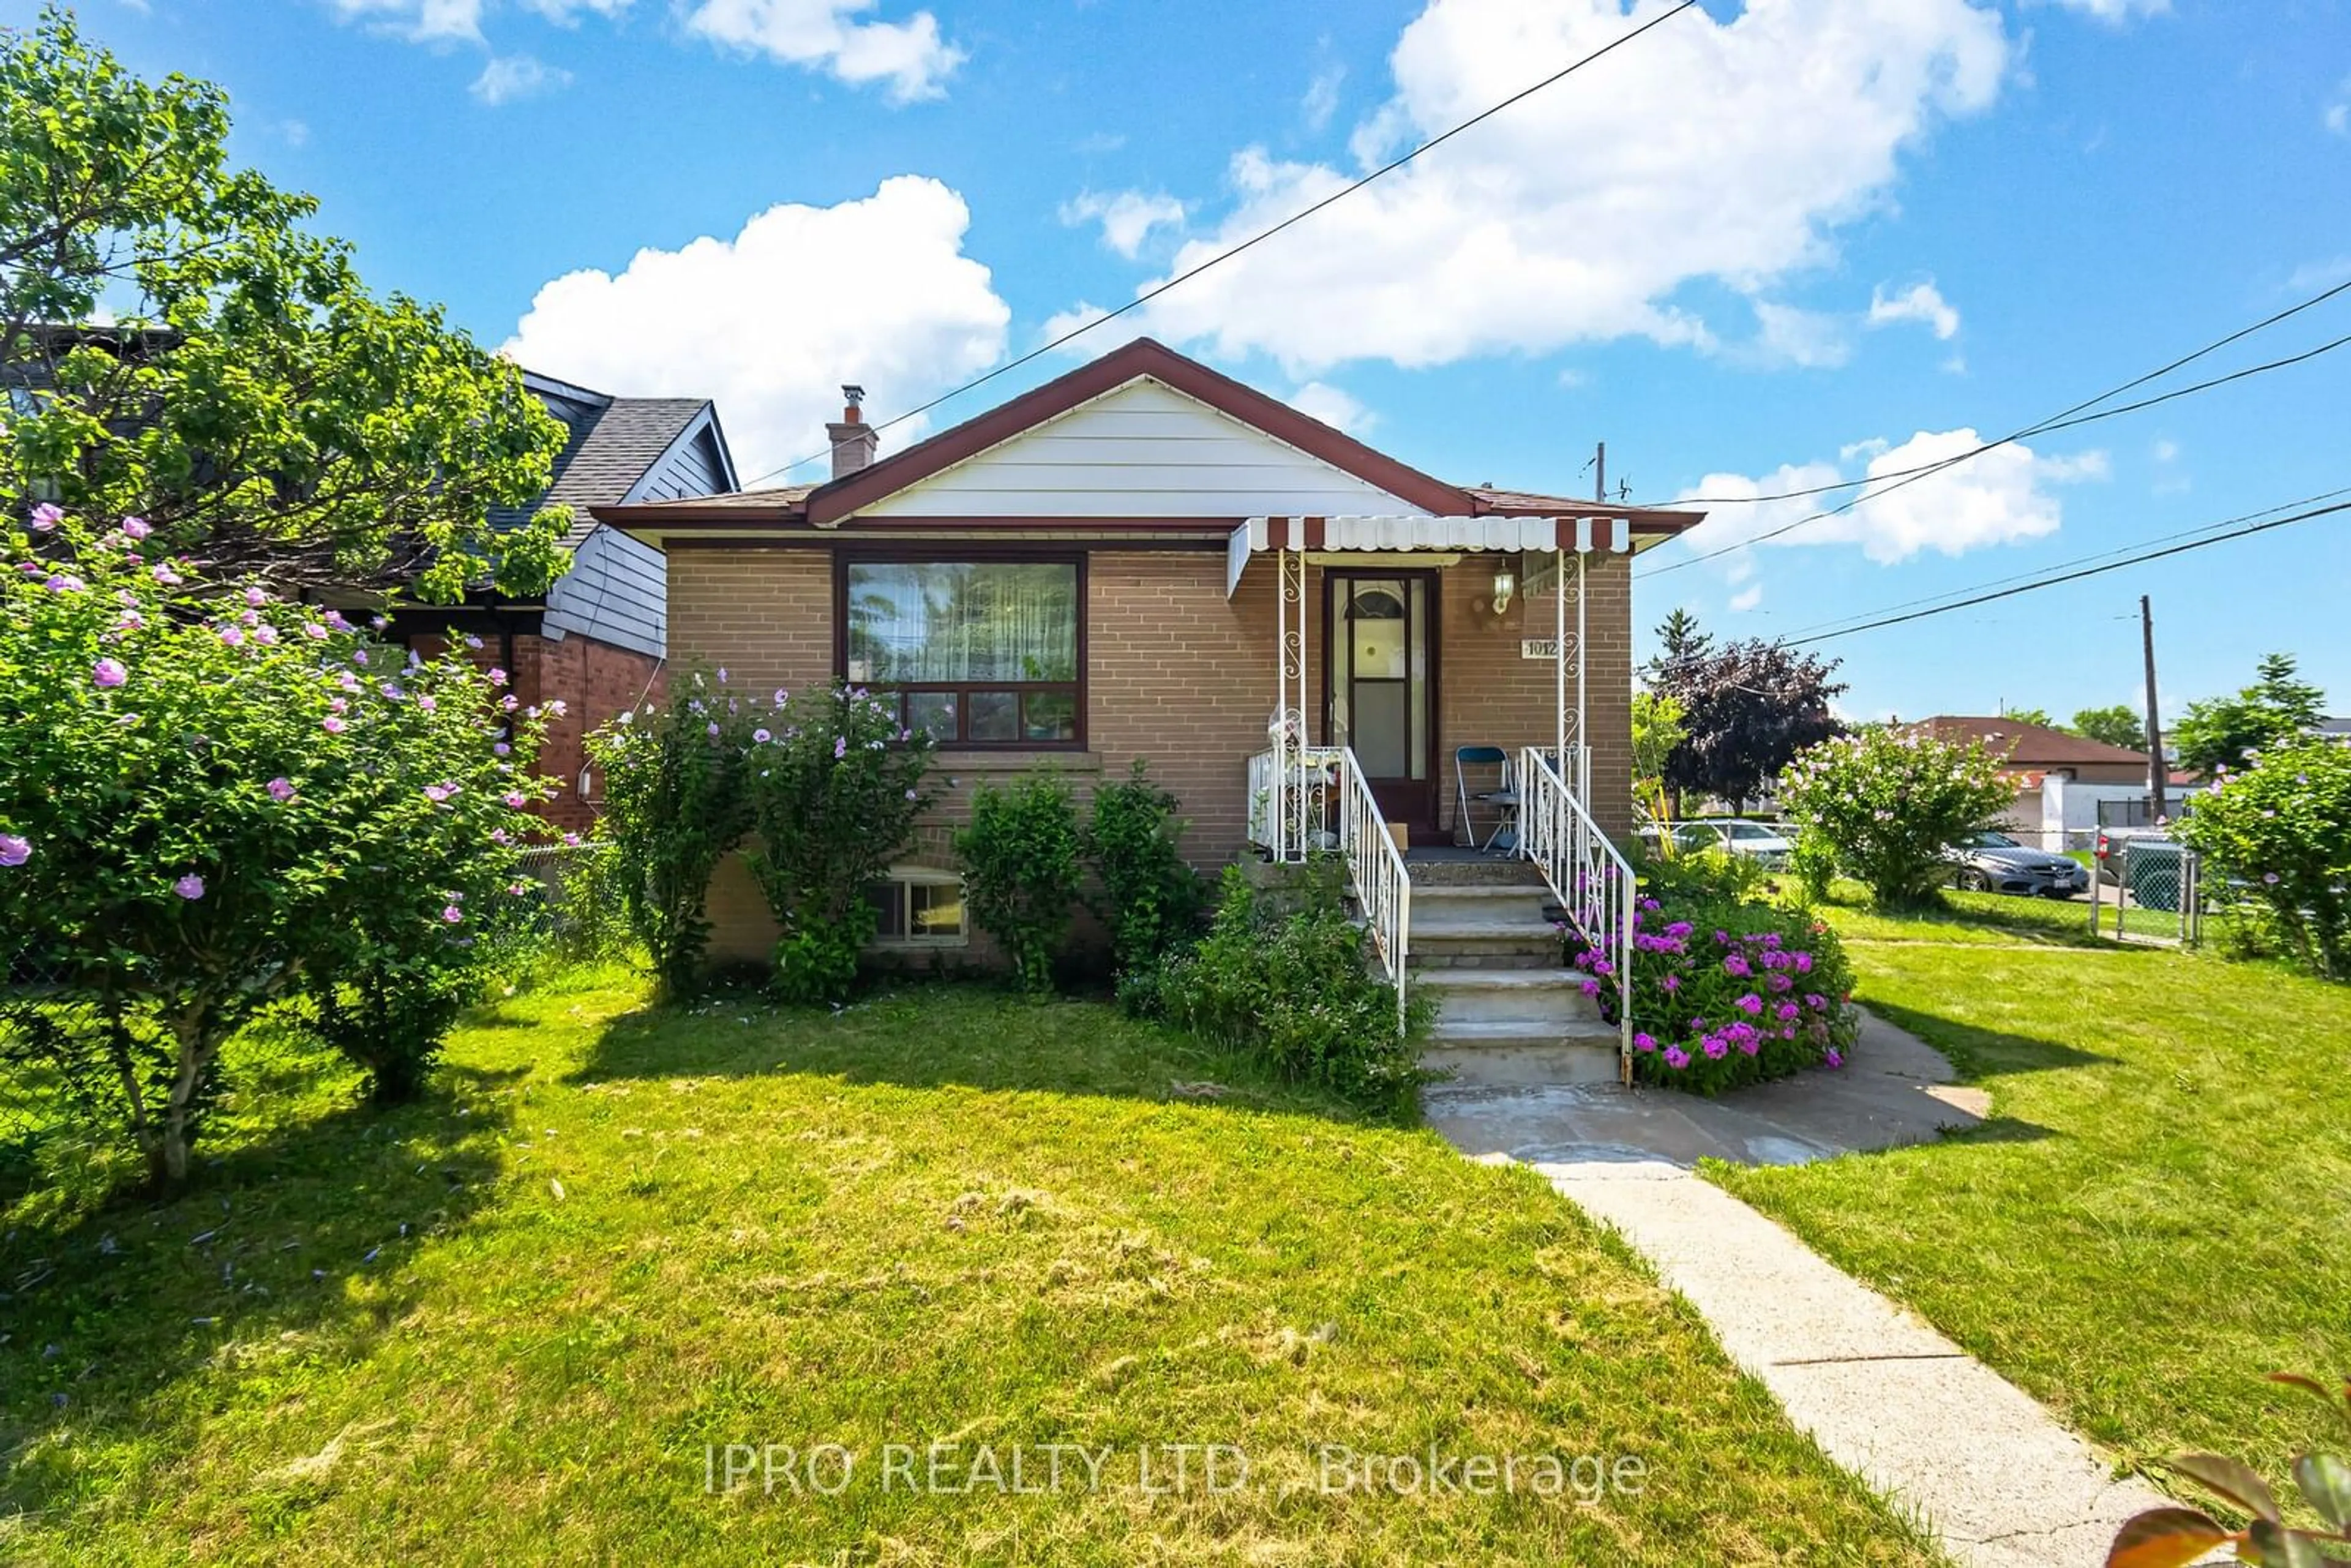 Frontside or backside of a home for 1012 Caledonia Rd, Toronto Ontario M6B 3Z1